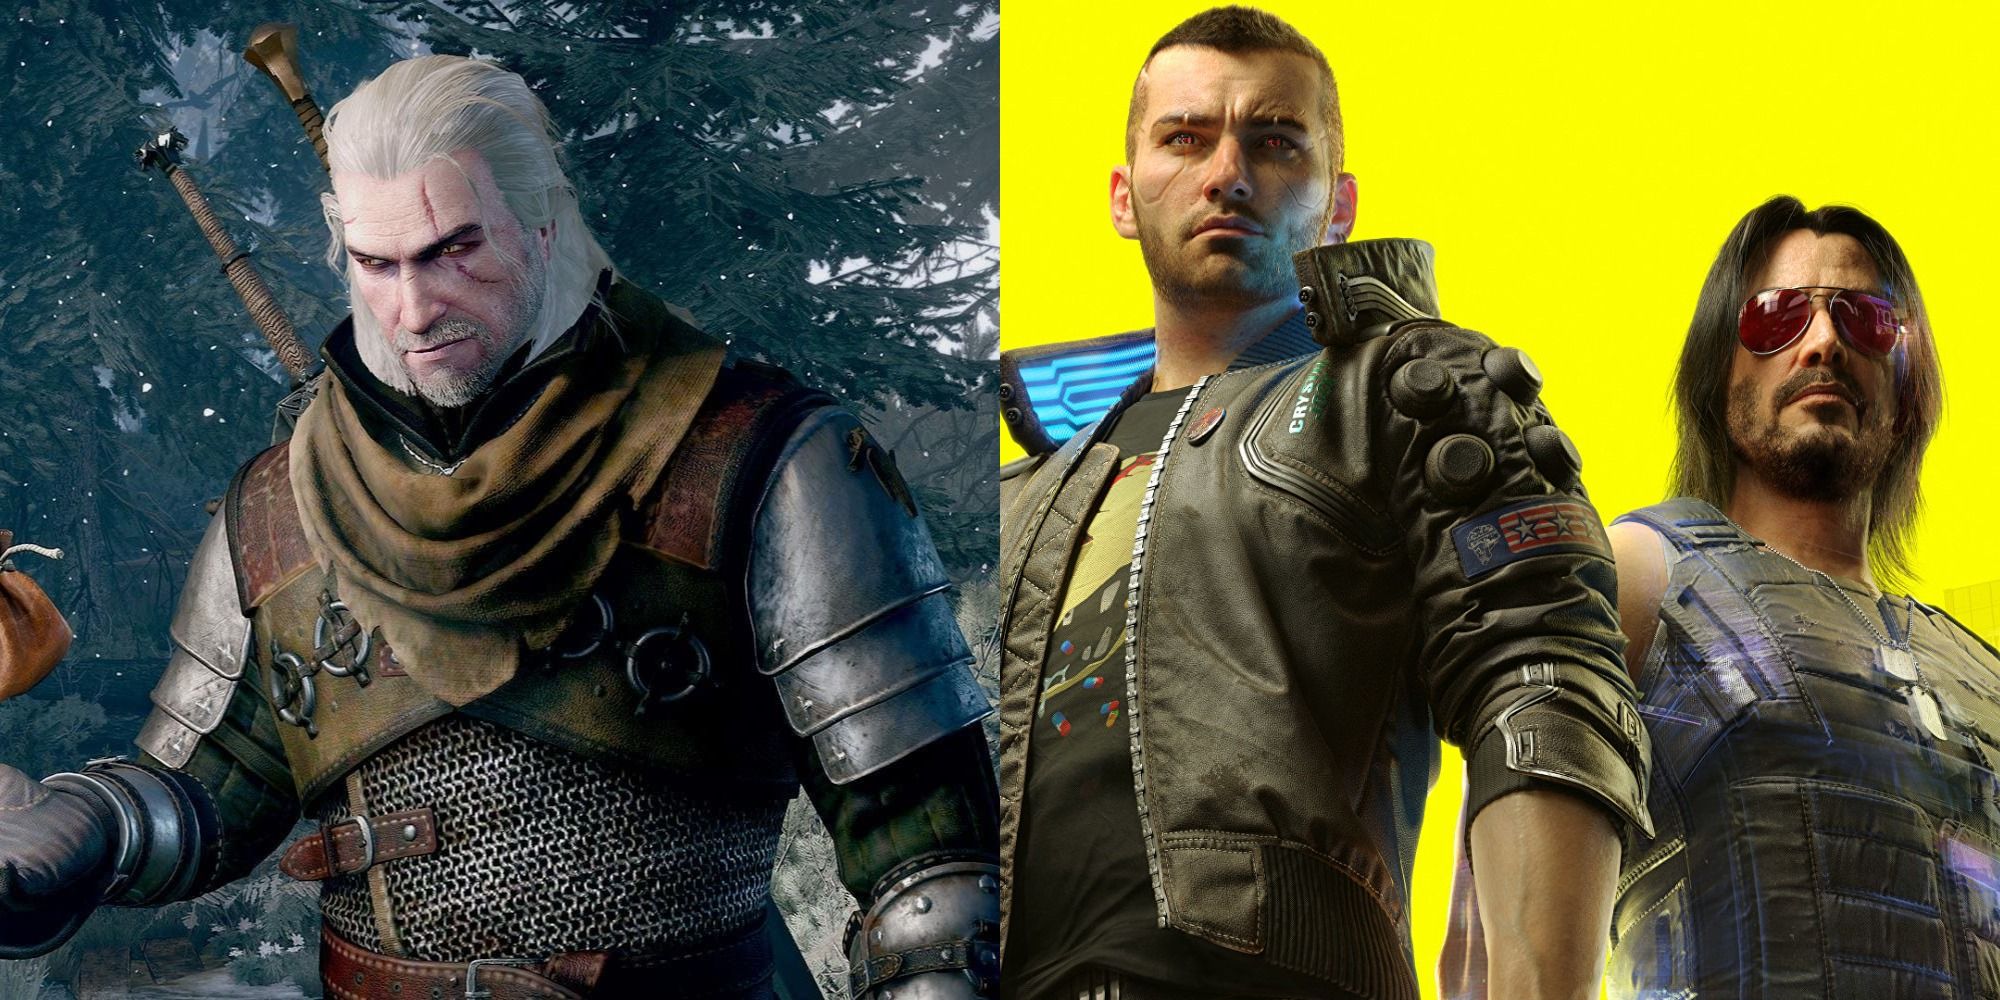 Side-by-side of The Witcher 3 and Cyberpunk 2077